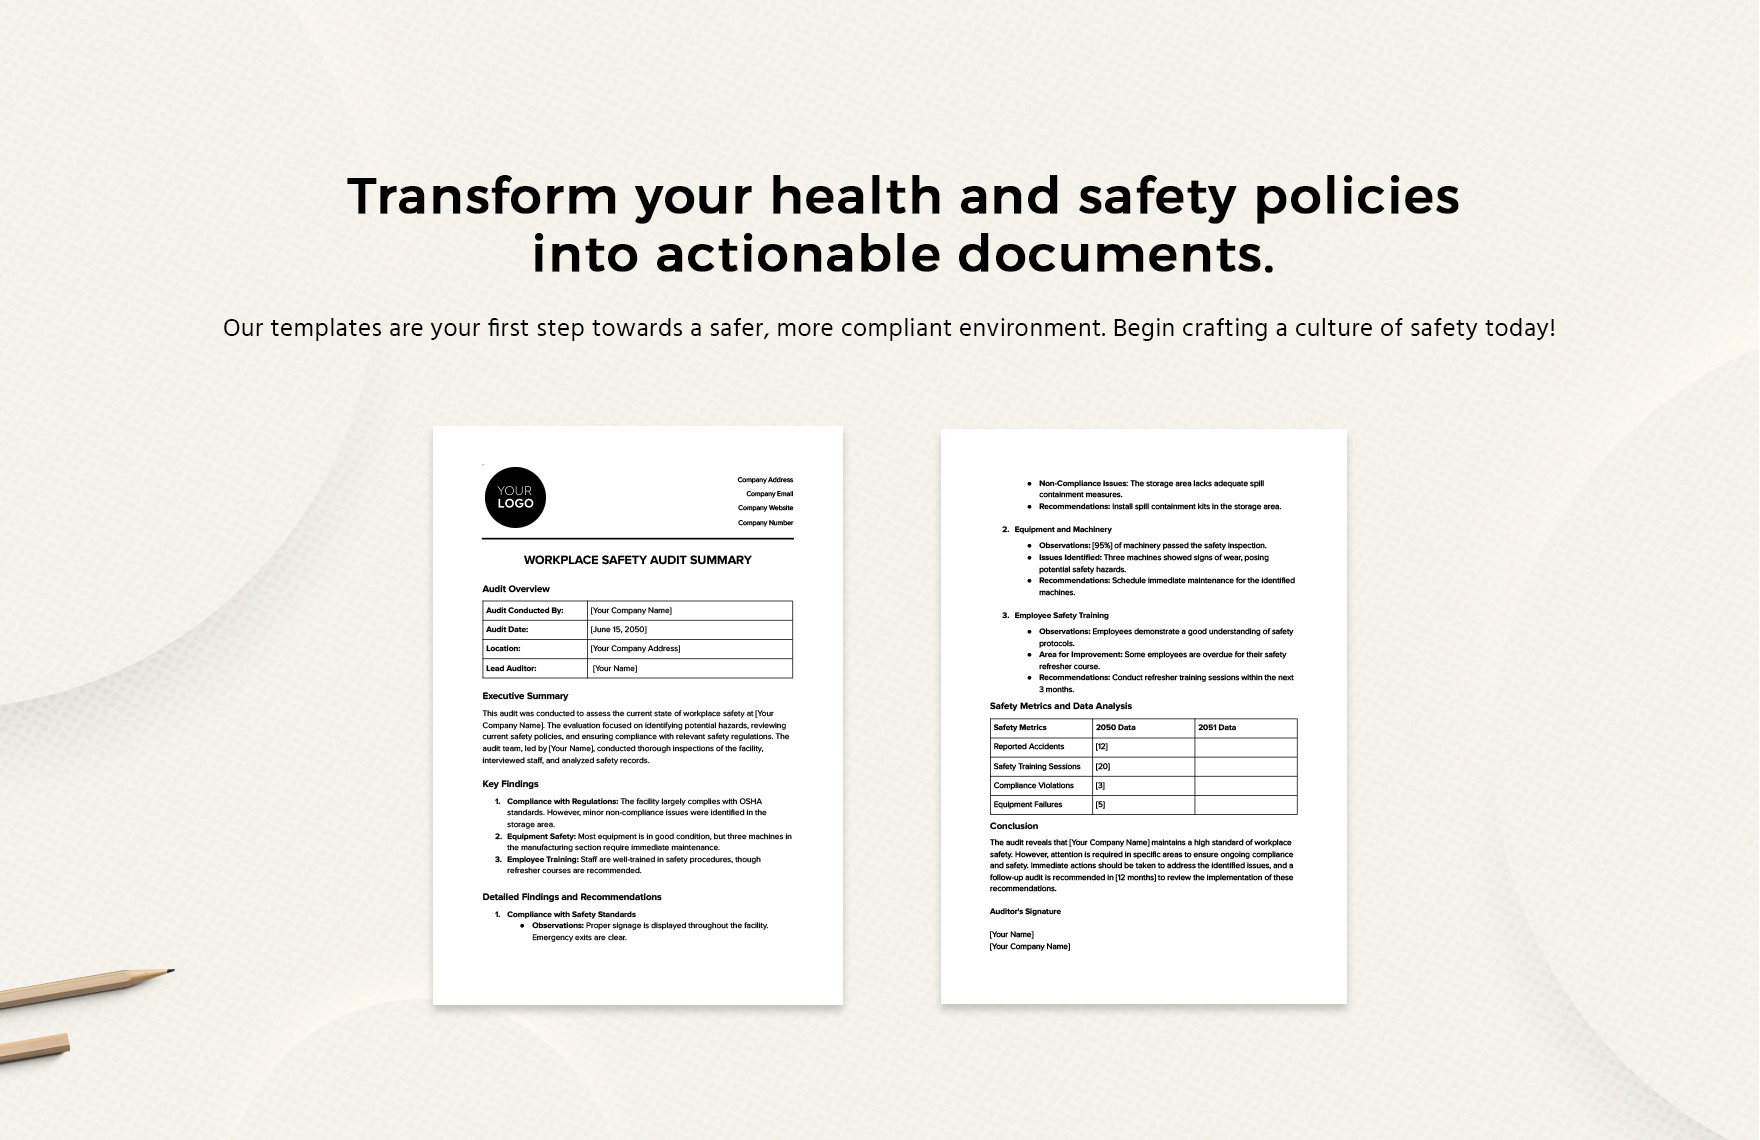 Workplace Safety Audit Summary Template